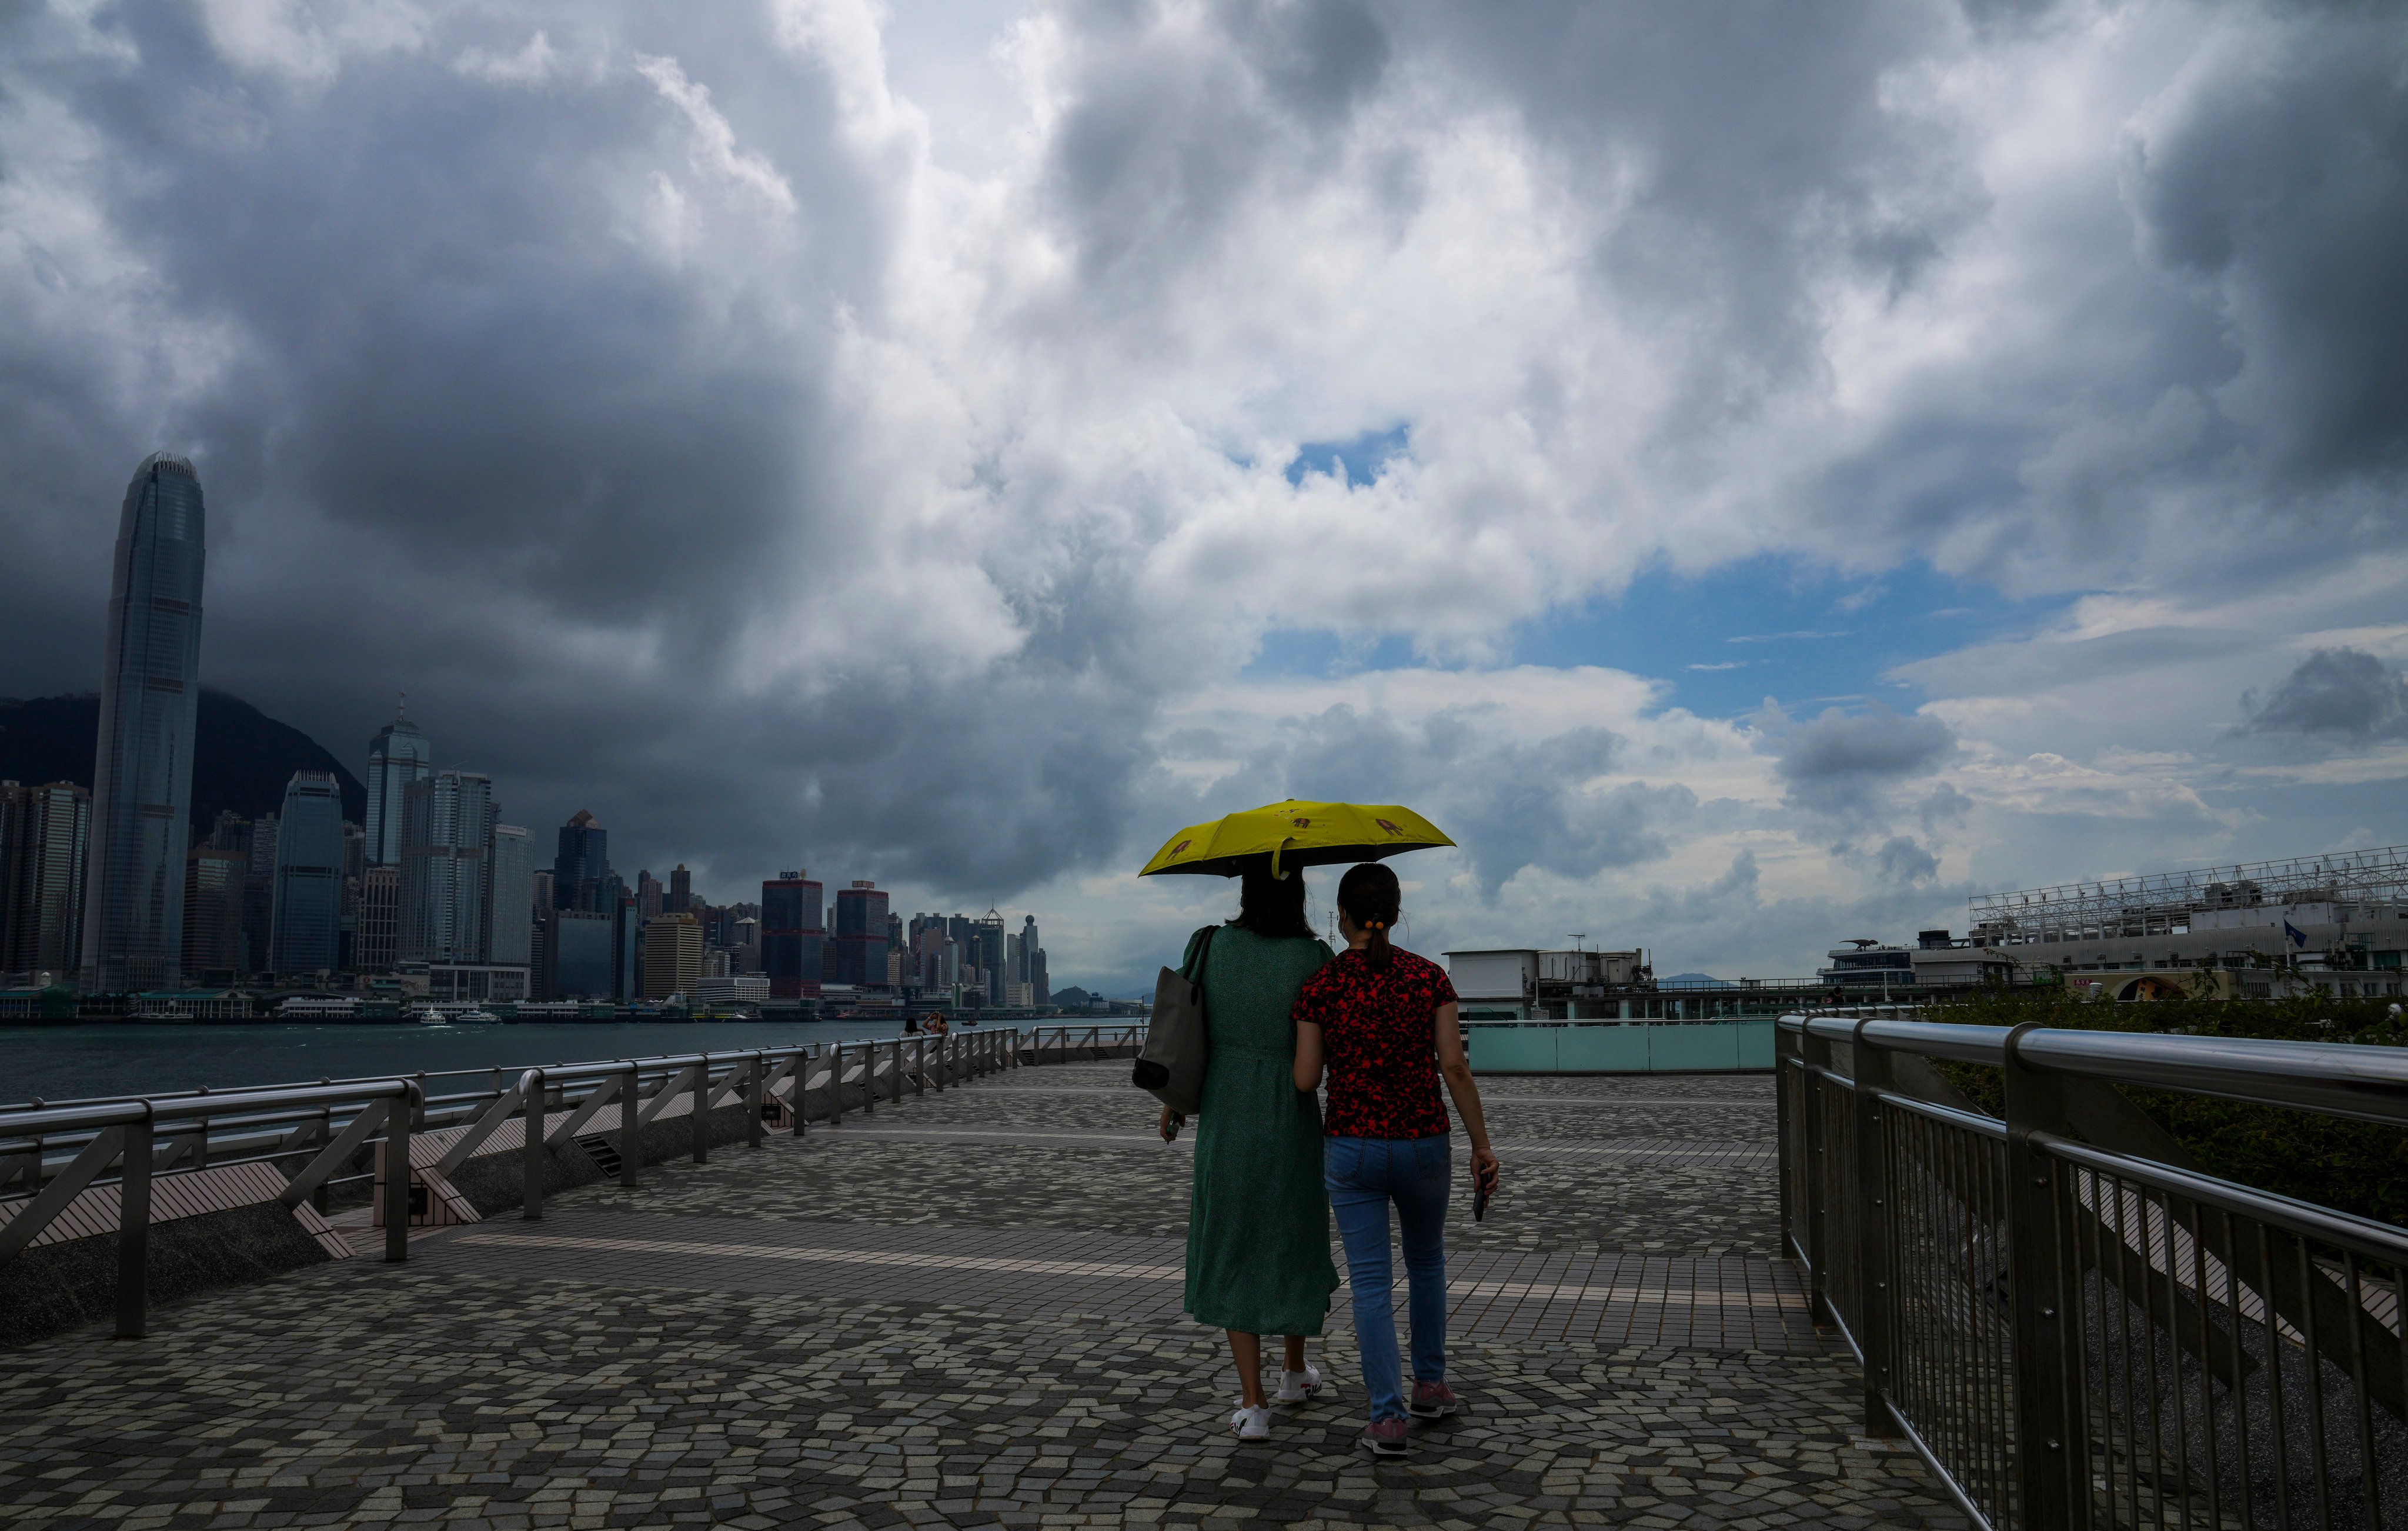 Hong Kong can expect some unsettled weather early next week. Photo: Sam Tsang